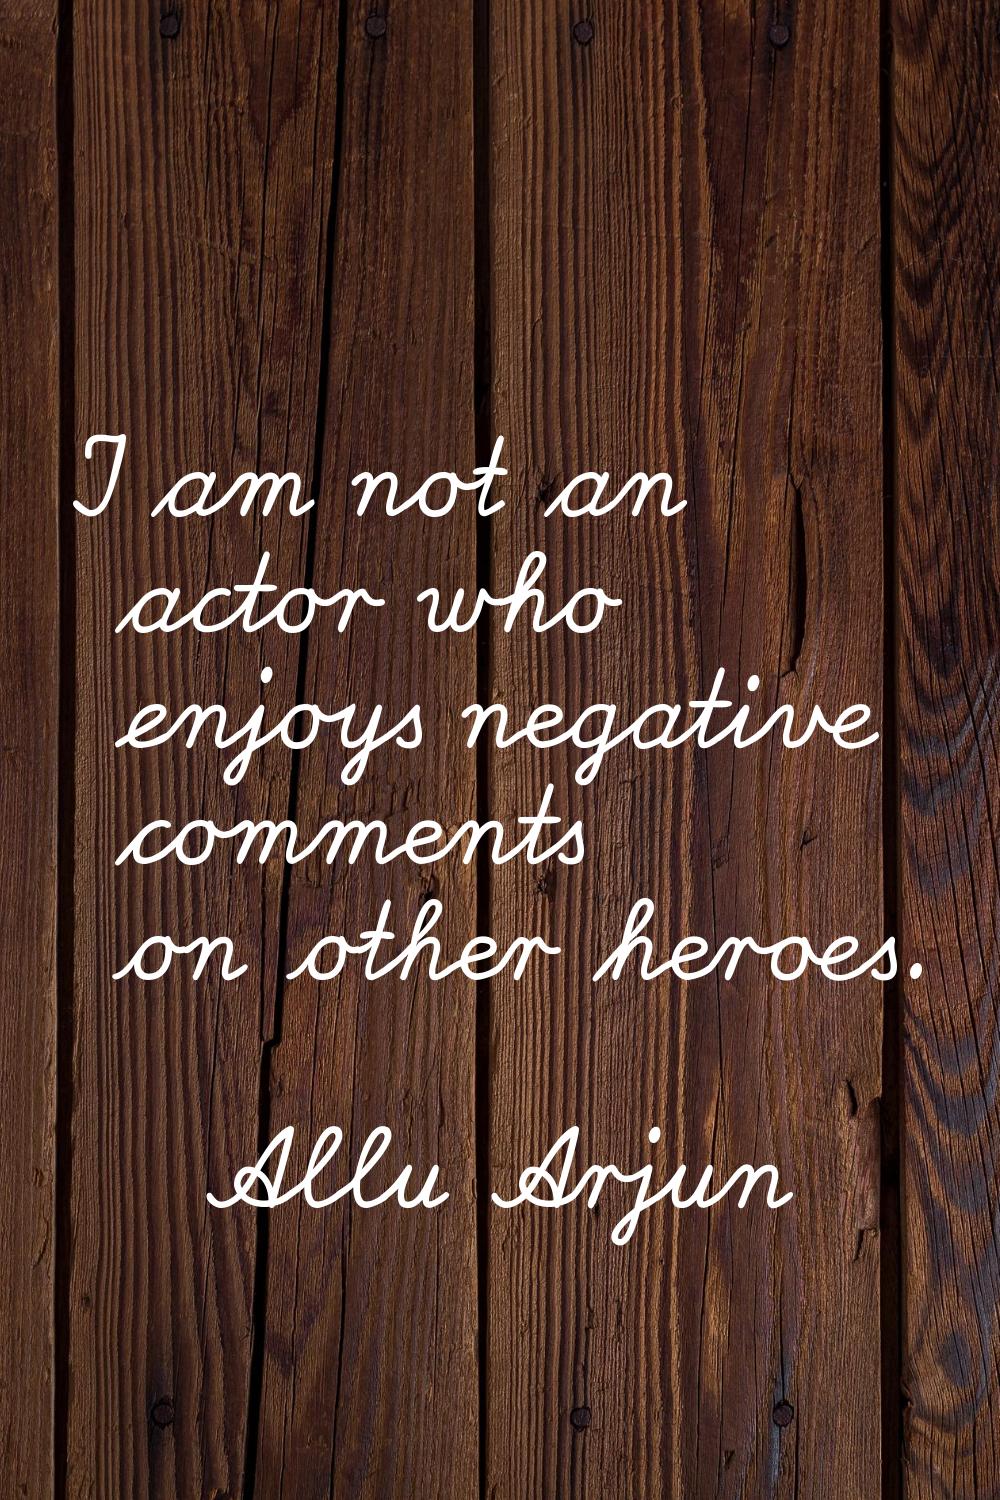 I am not an actor who enjoys negative comments on other heroes.